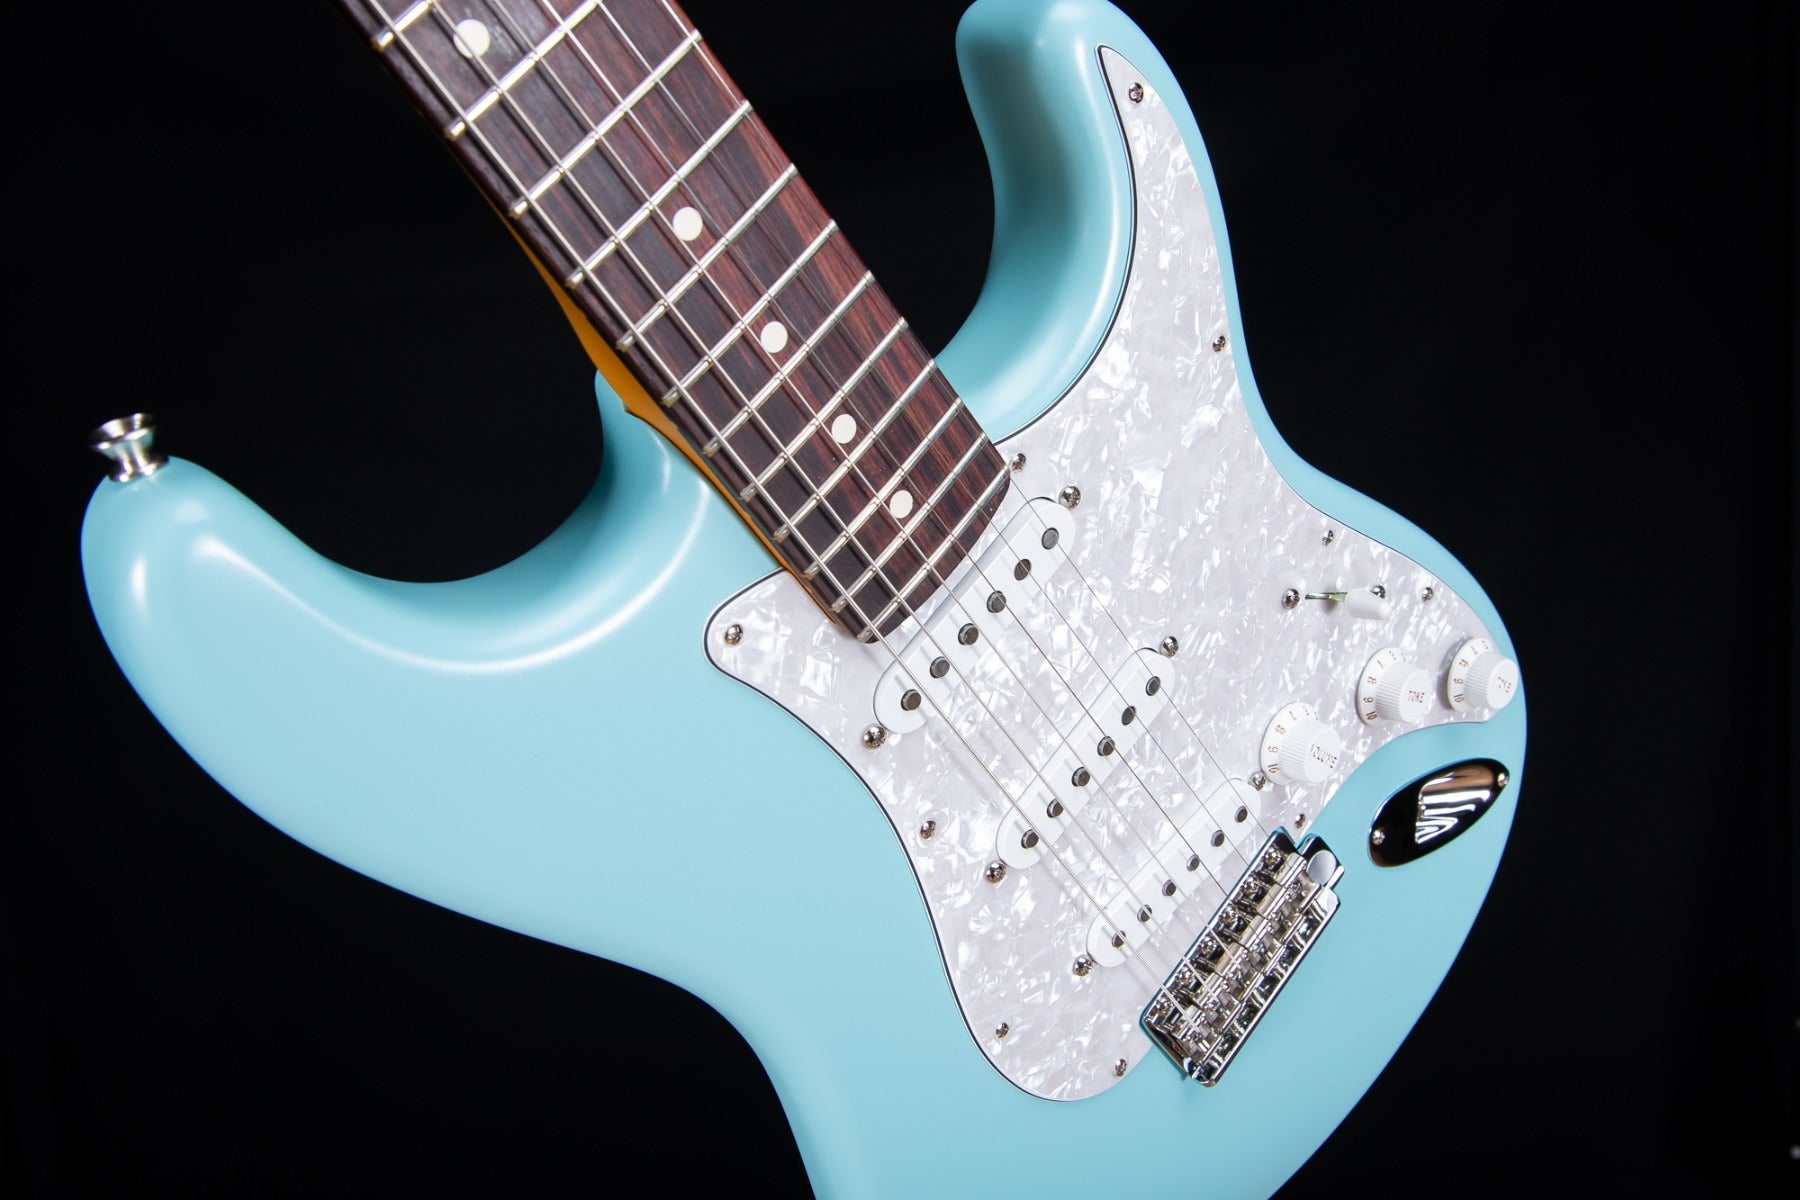 Fender Cory Wong Stratocaster - Rosewood, Daphne Blue Limited Edition view 5